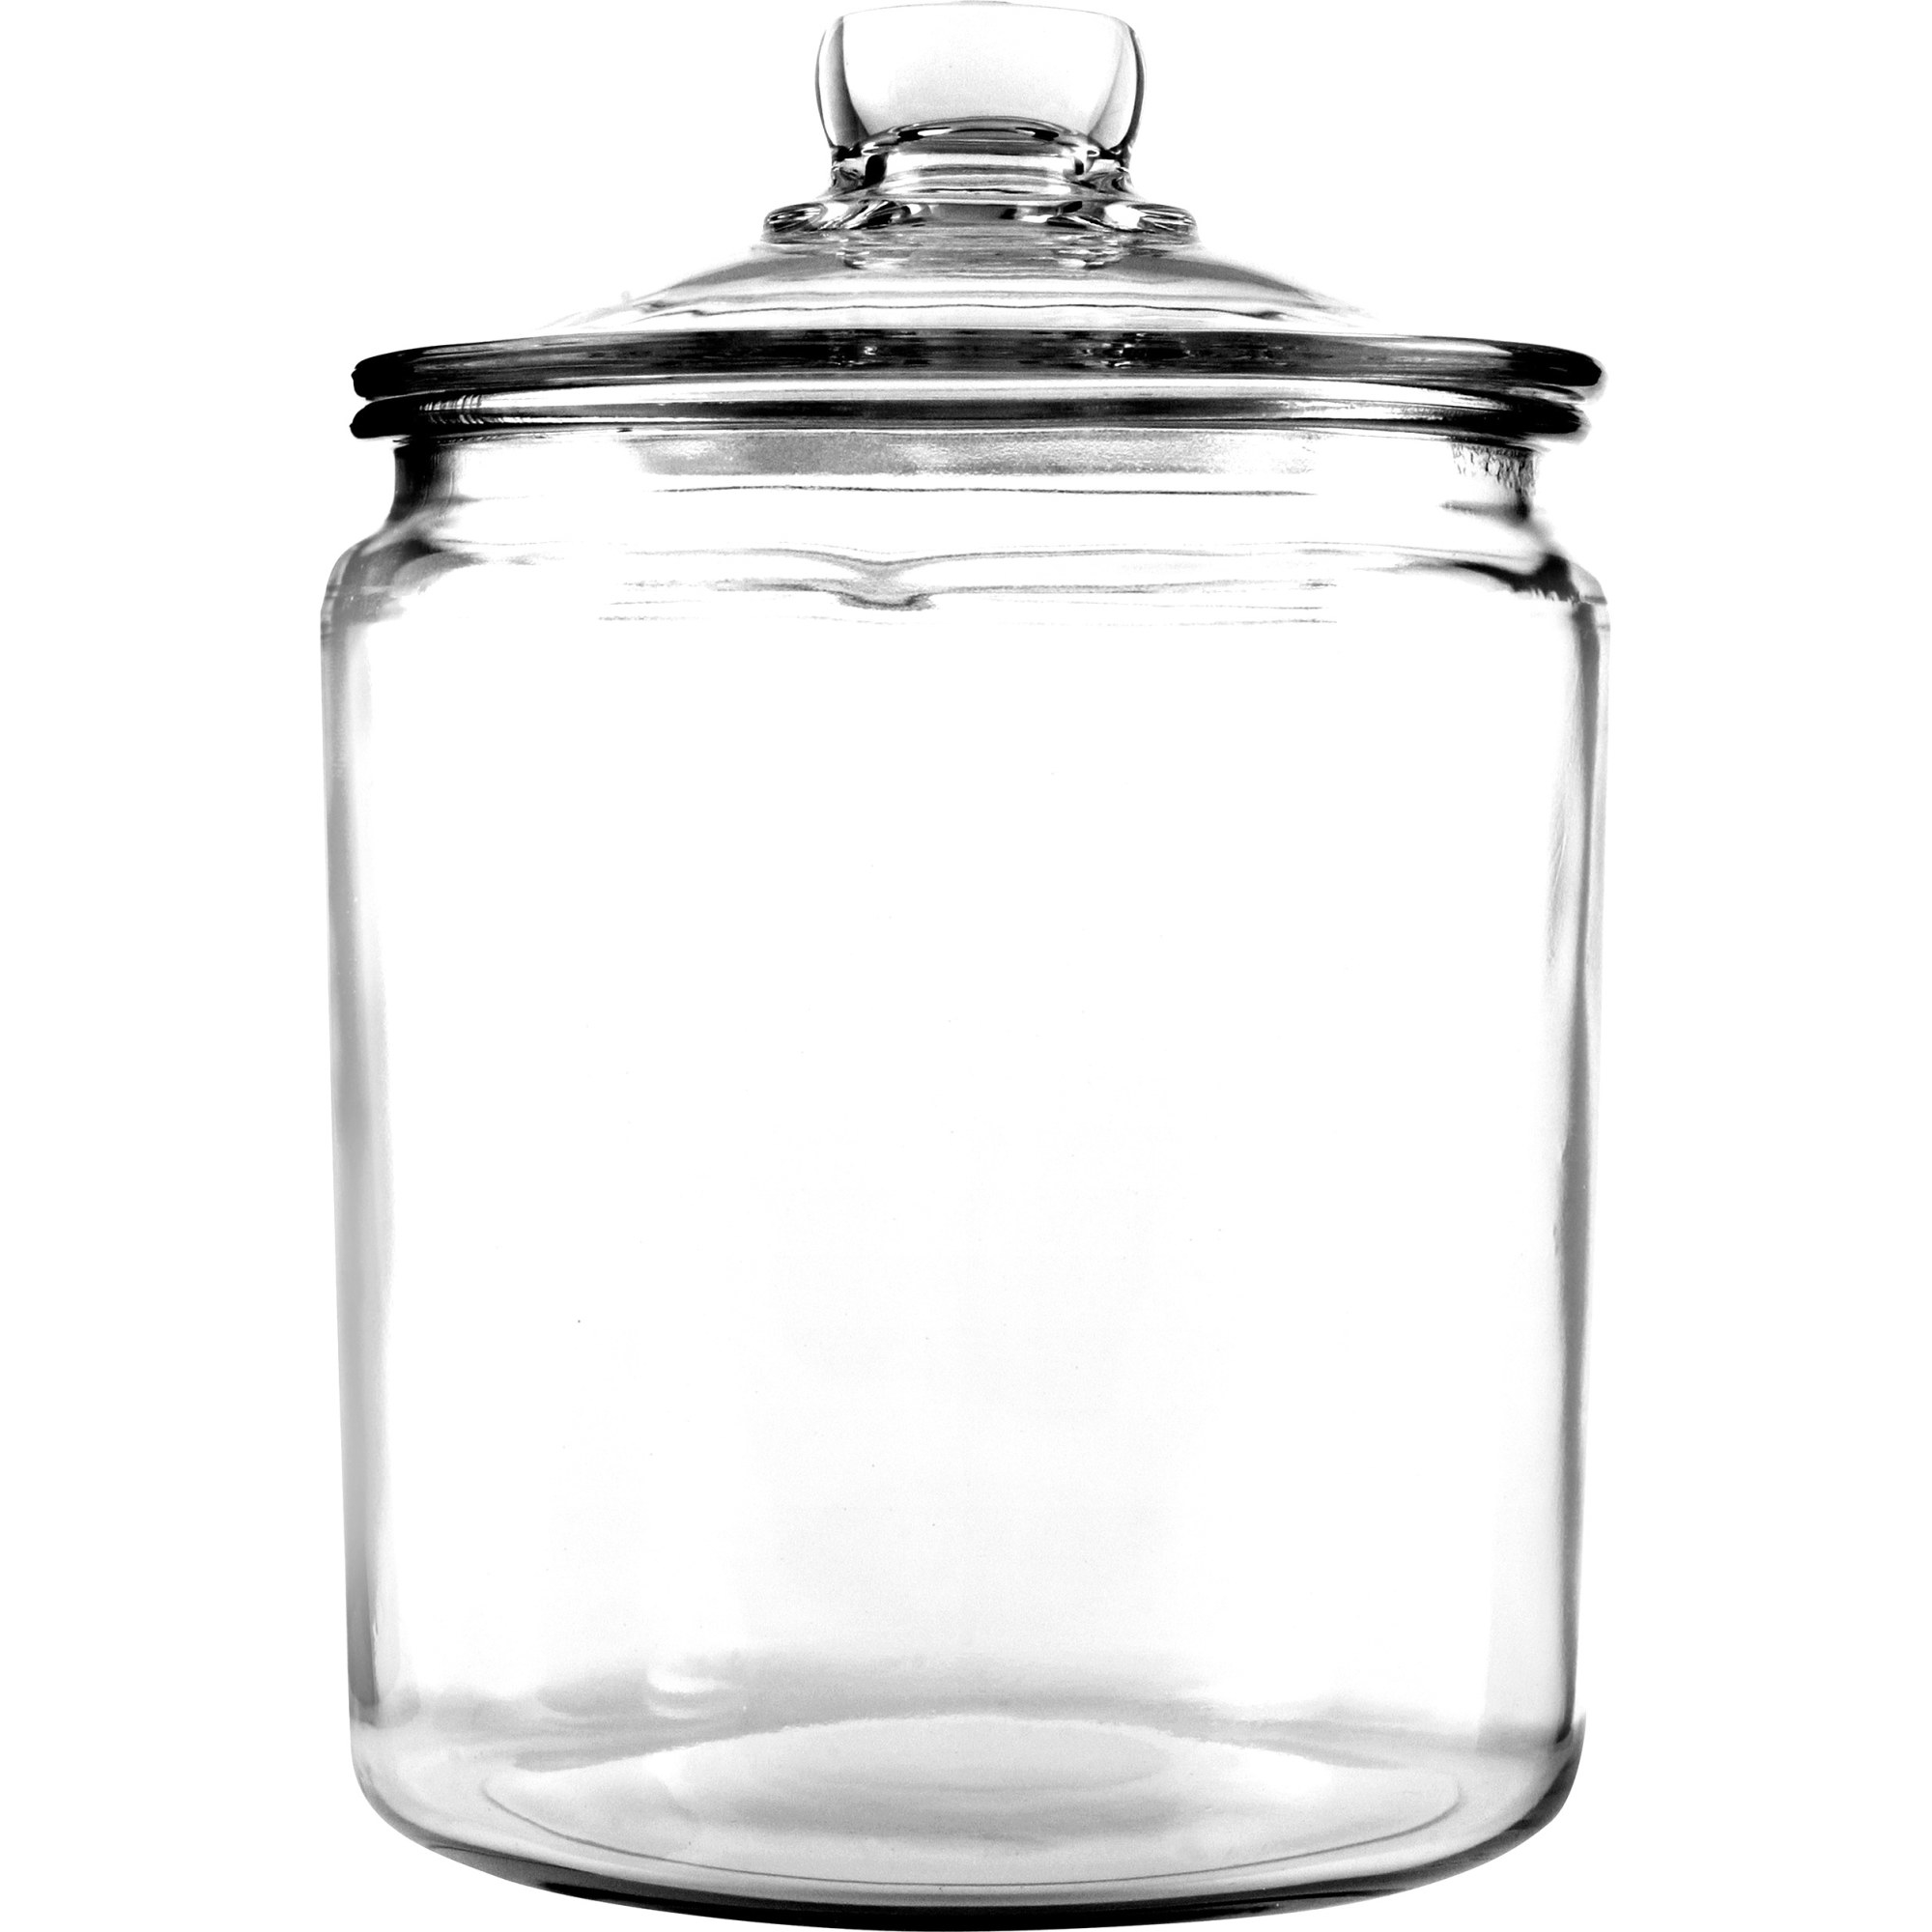 The glass jar is clear with a matching lid and handle on top